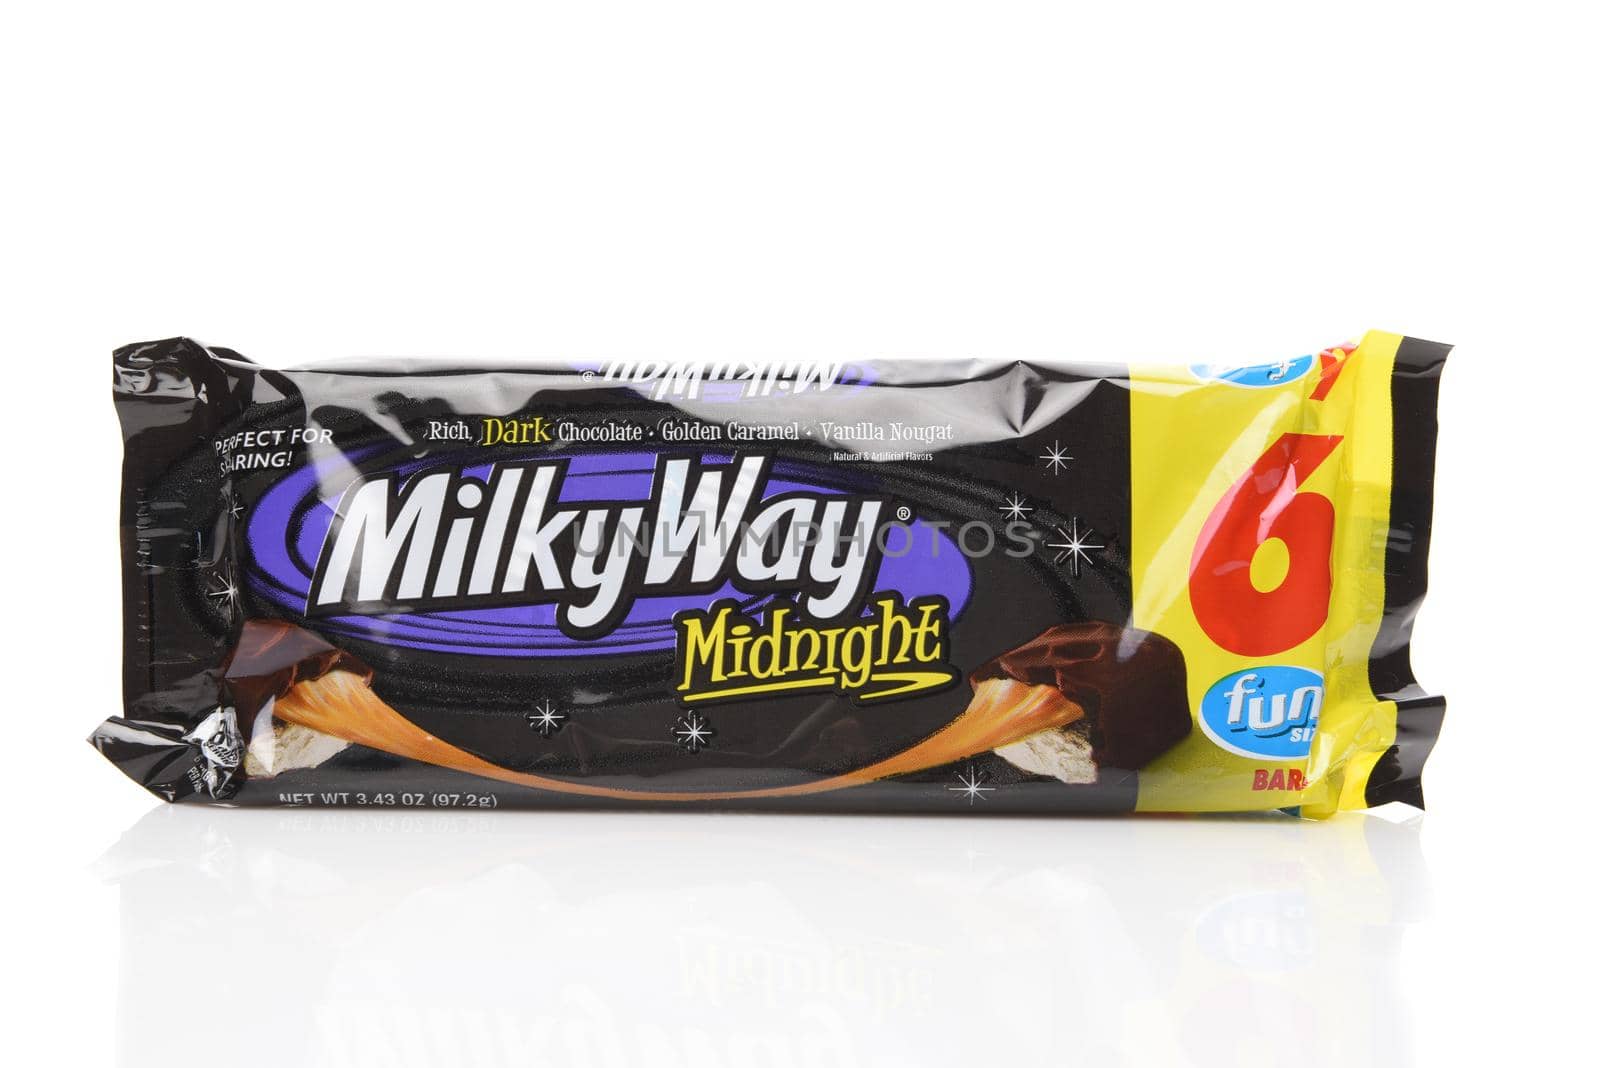 IRVINE, CALIFORNIA - AUGUST 14, 2019: A package of Fun Size Milky Way Midnight candy bars by sCukrov